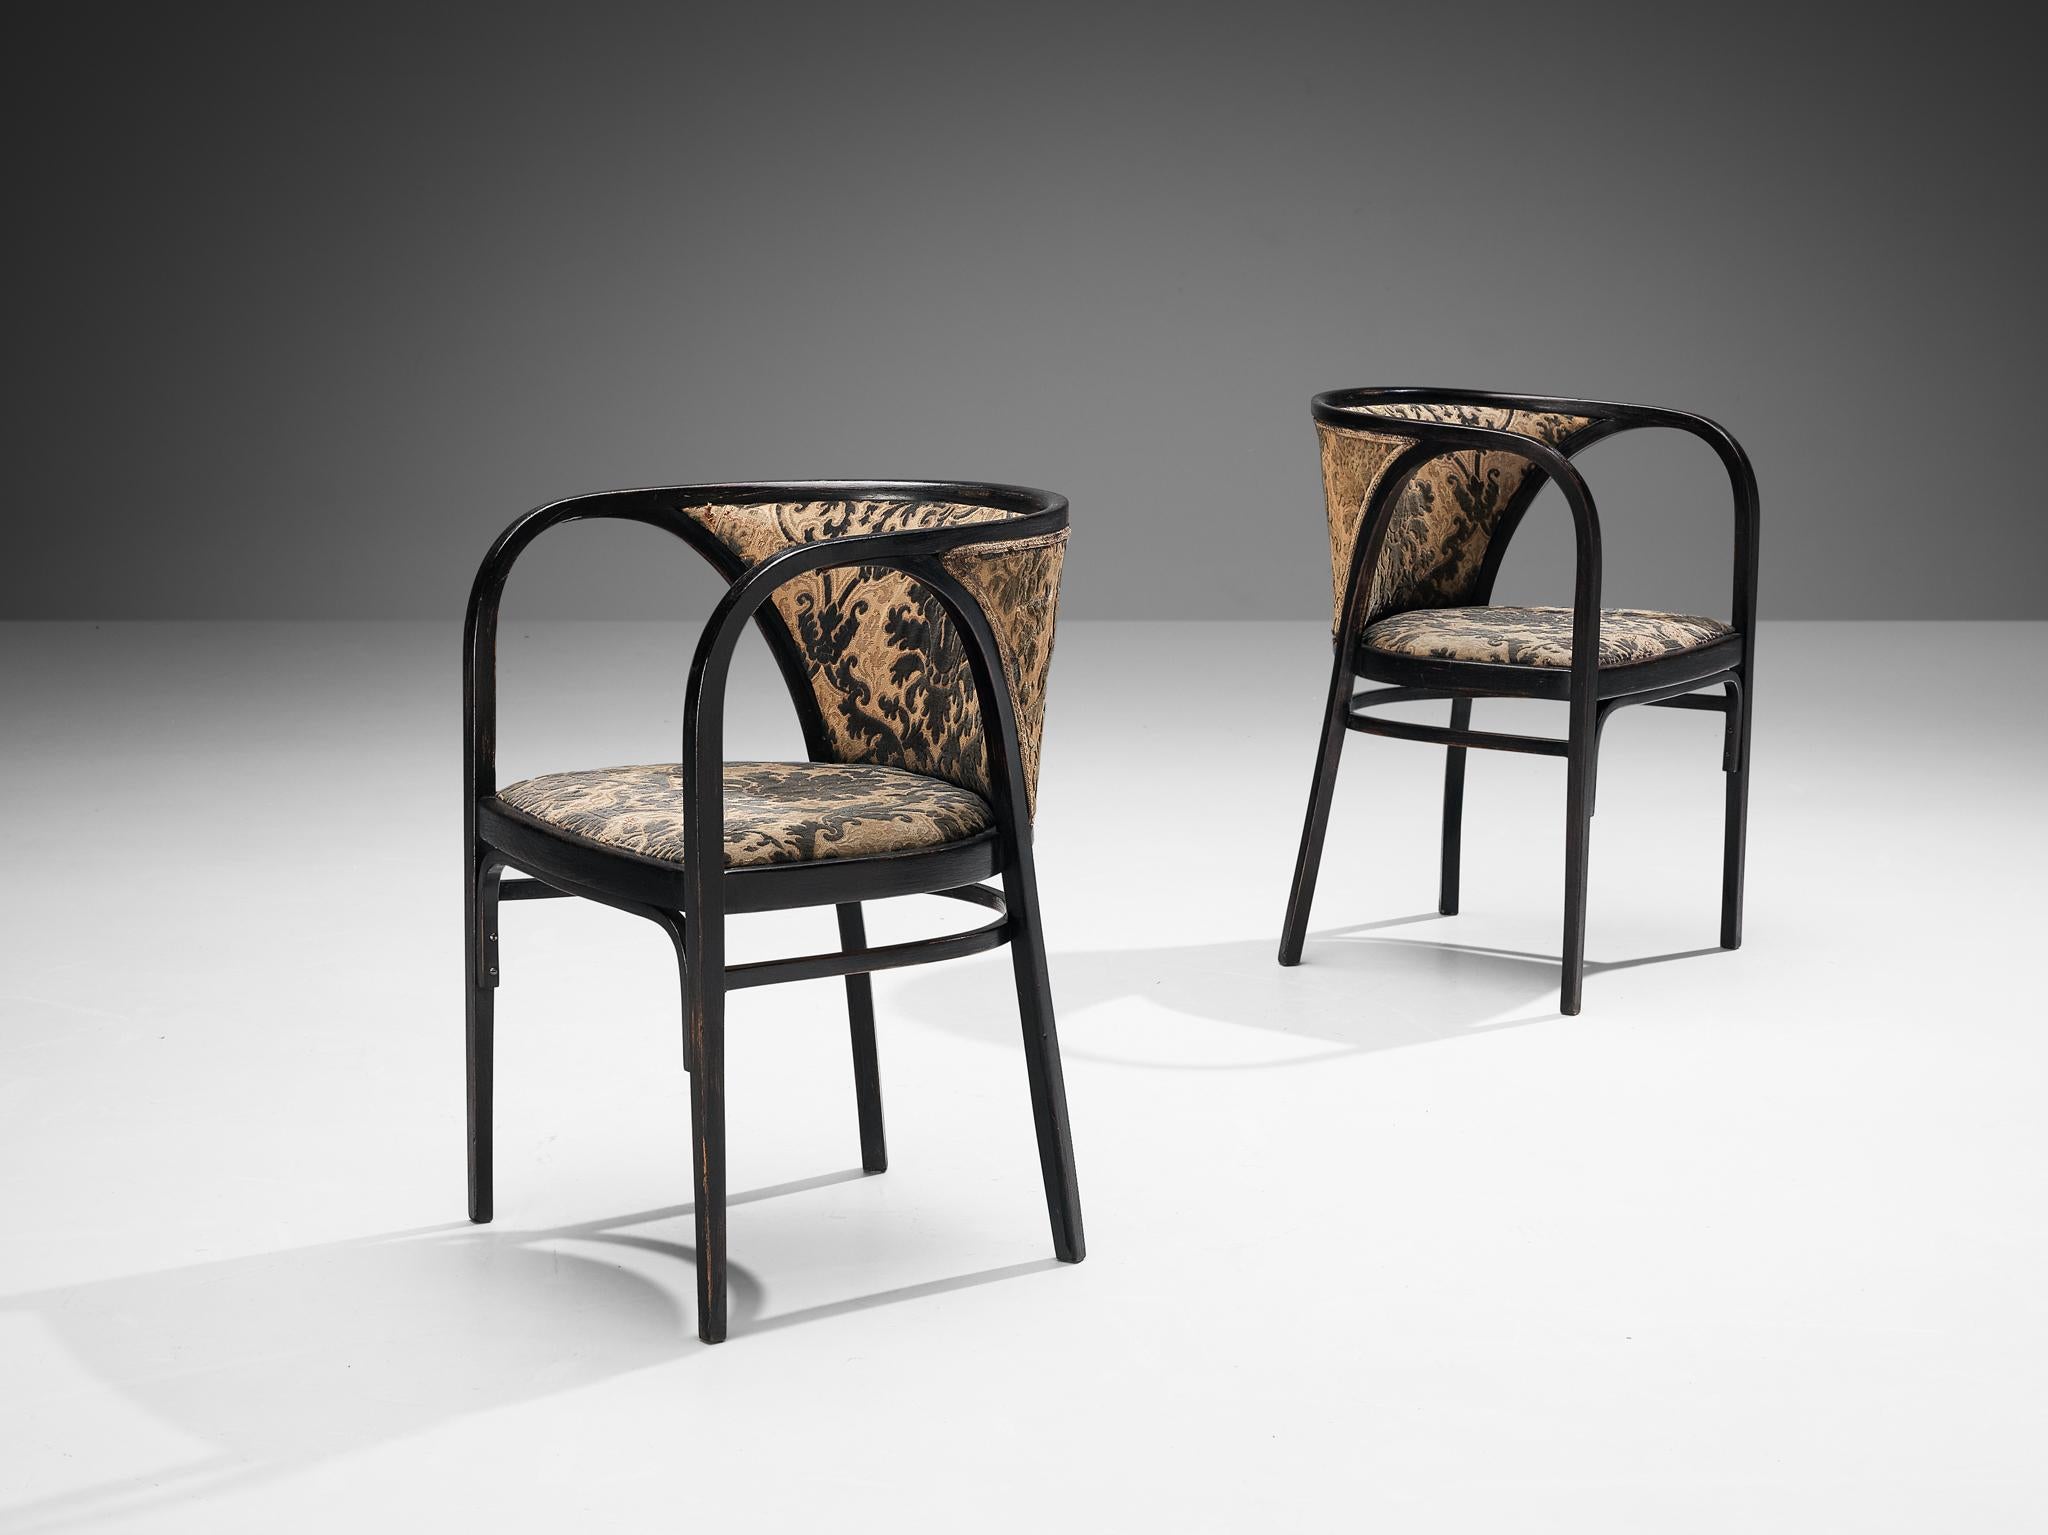 Thonet, pair of armchairs, bentwood and fabric, Austria, 1920s

A pair of armchairs of which the frame is composed of elegantly curved lines and round edges, contributing to the chair’s sculptural appearance. The upholstery of the seat and backrest